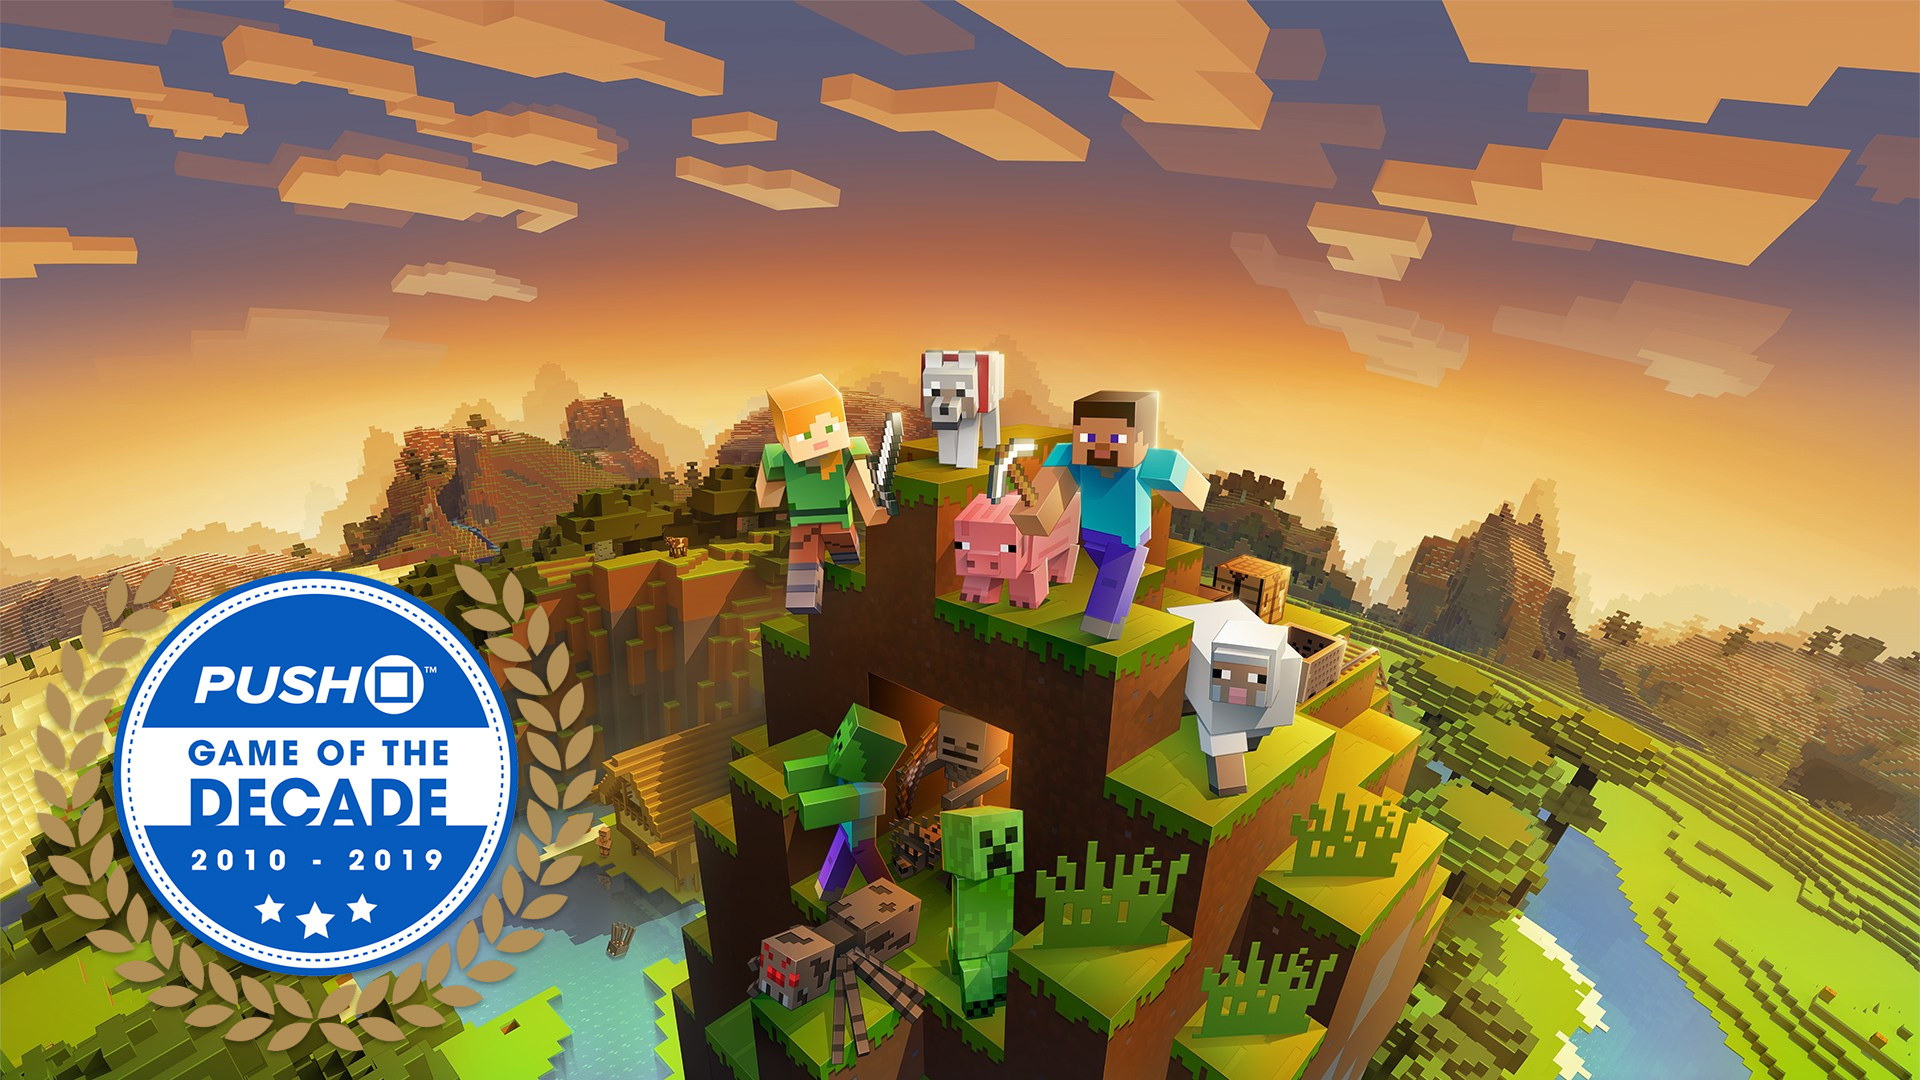 Game Of The Decade Minecraft S Emergent Gameplay And Player Freedom Led To Global Domination Push Square